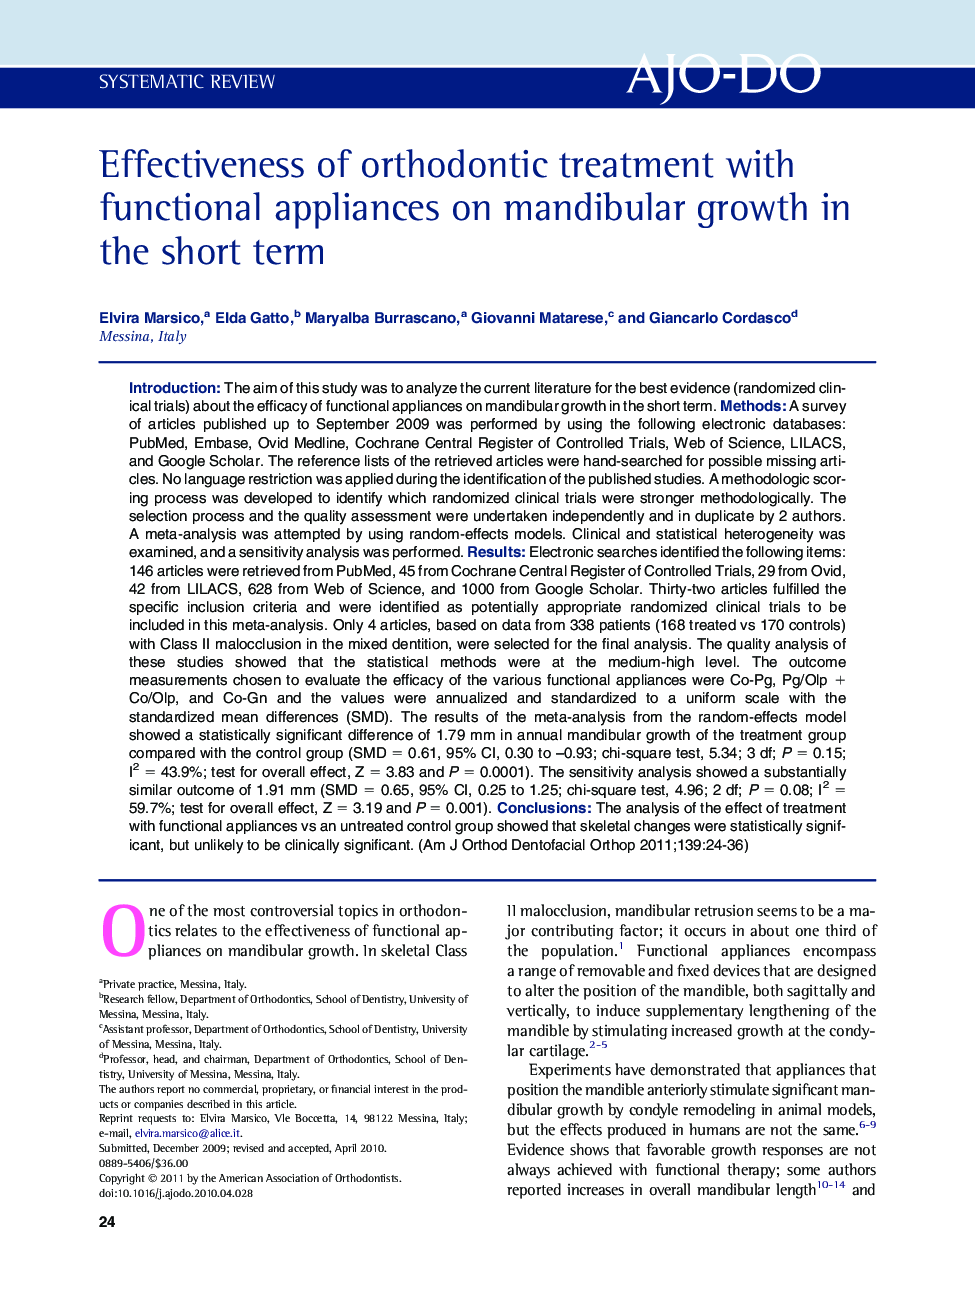 Effectiveness of orthodontic treatment with functional appliances on mandibular growth in the short term 